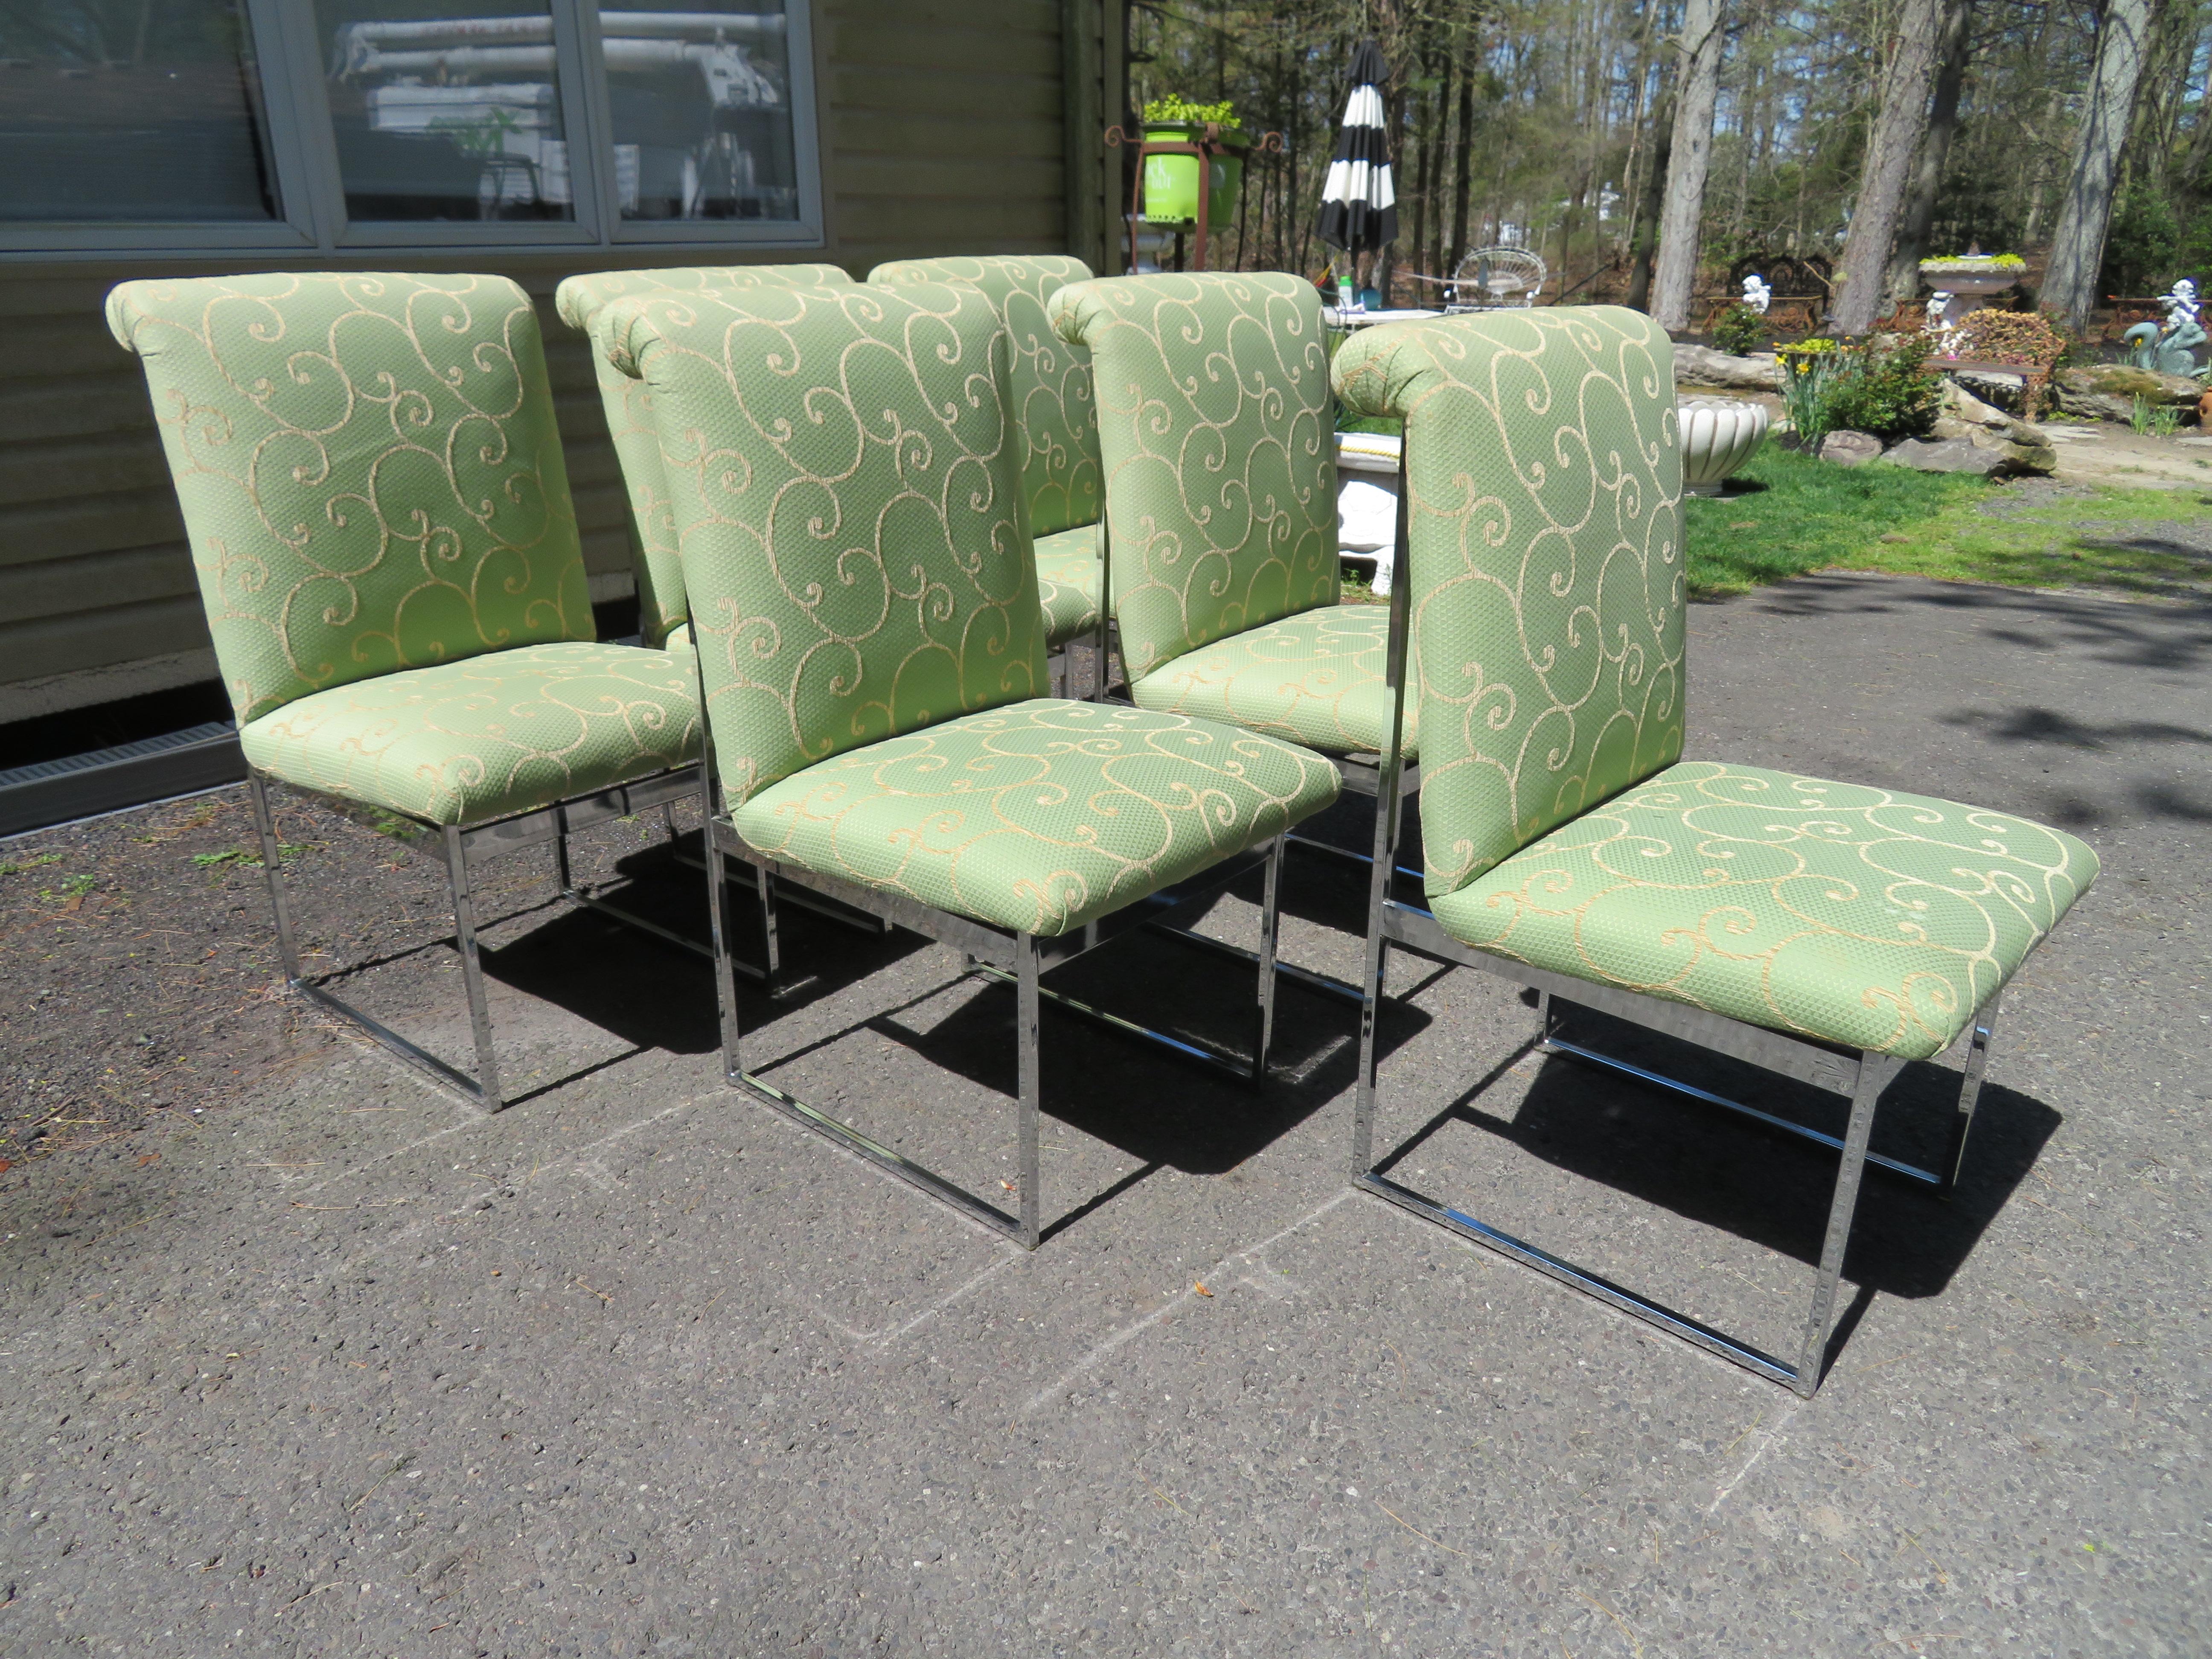 Set of 6 dining chairs with heavy polished chrome frames, designed in the style of Milo Baughman and produced by Flair, USA, circa 1960. These were reupholstered in the past 10 years in a lovely celadon green woven fabric with subtle gold swirls. We